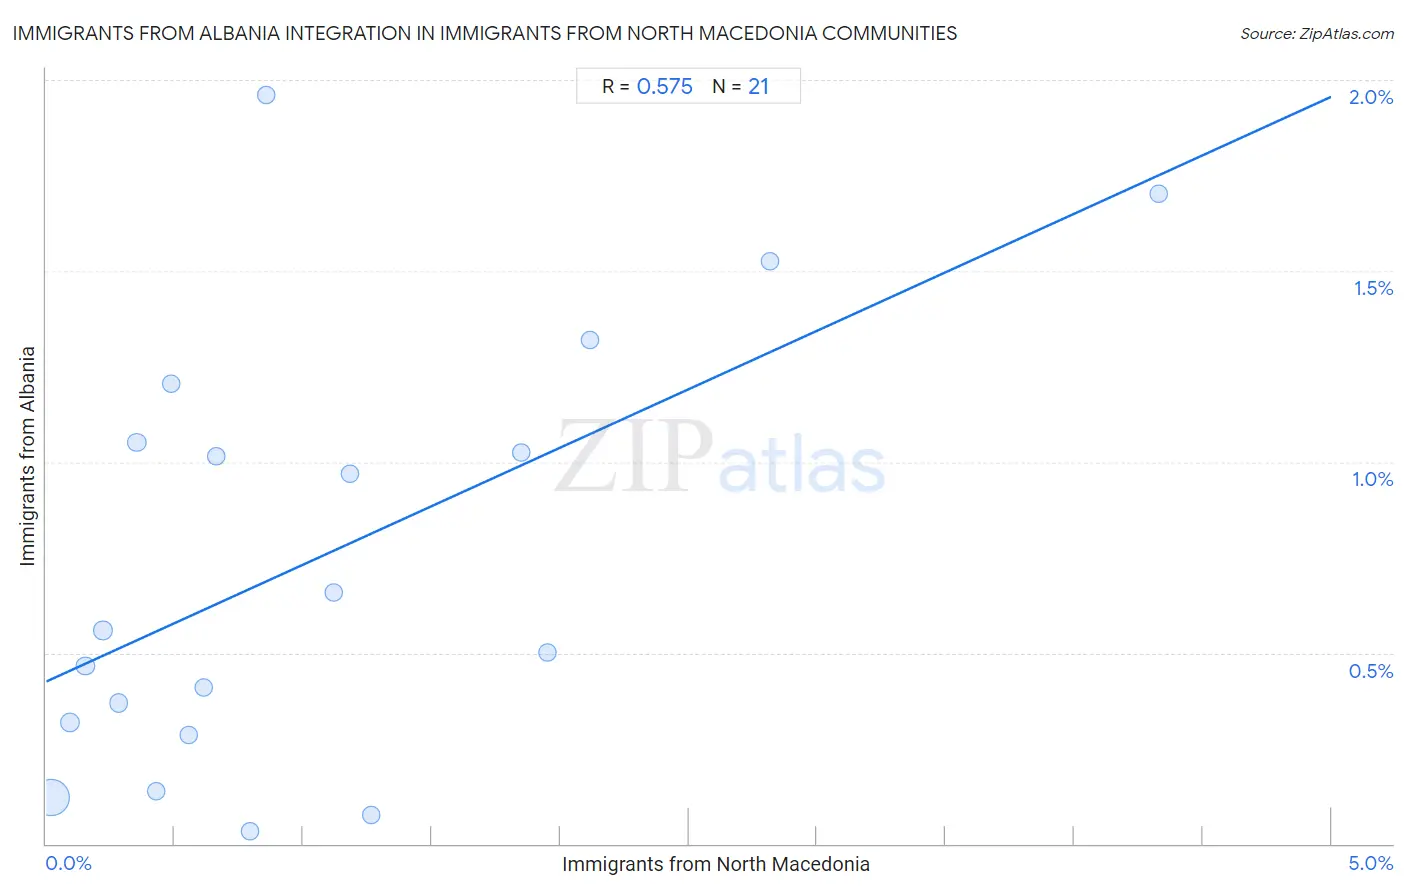 Immigrants from North Macedonia Integration in Immigrants from Albania Communities